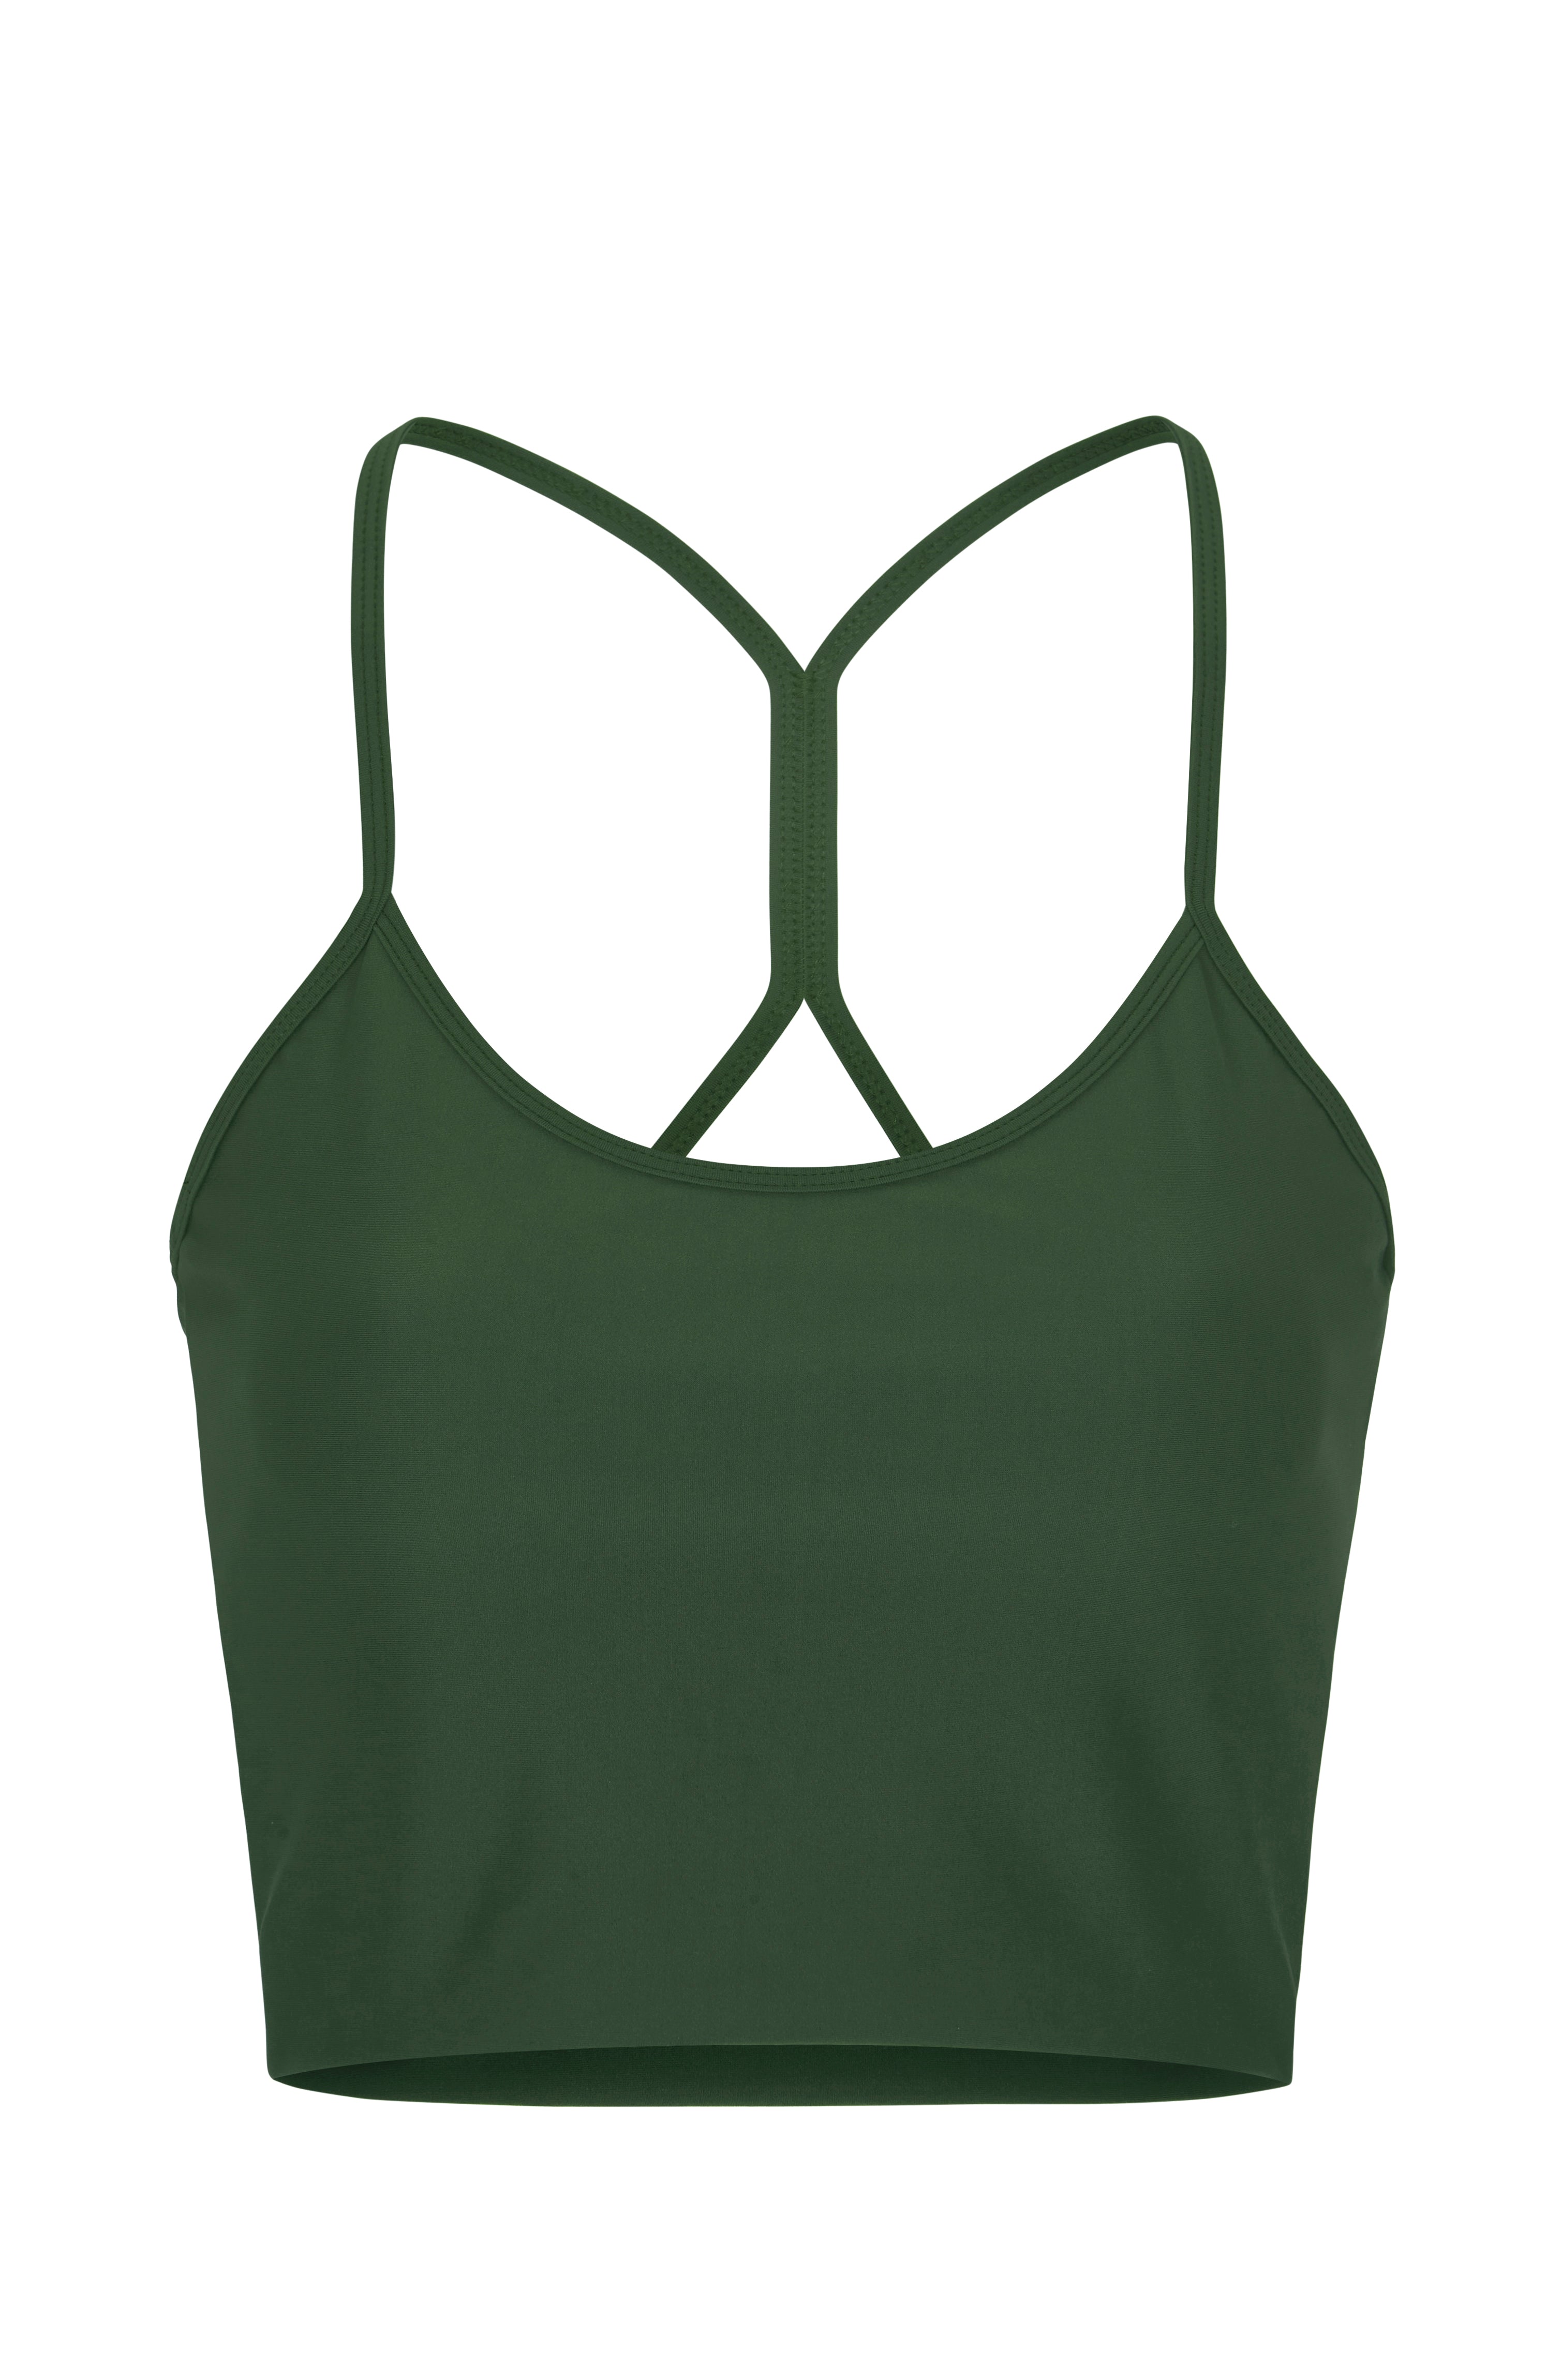 Sisterly Tribe - Yoga Singlet Top Cool Khaki. Light support, Thin shoulder strap, minimalistic design, Buttery Soft and light, matte fabric.